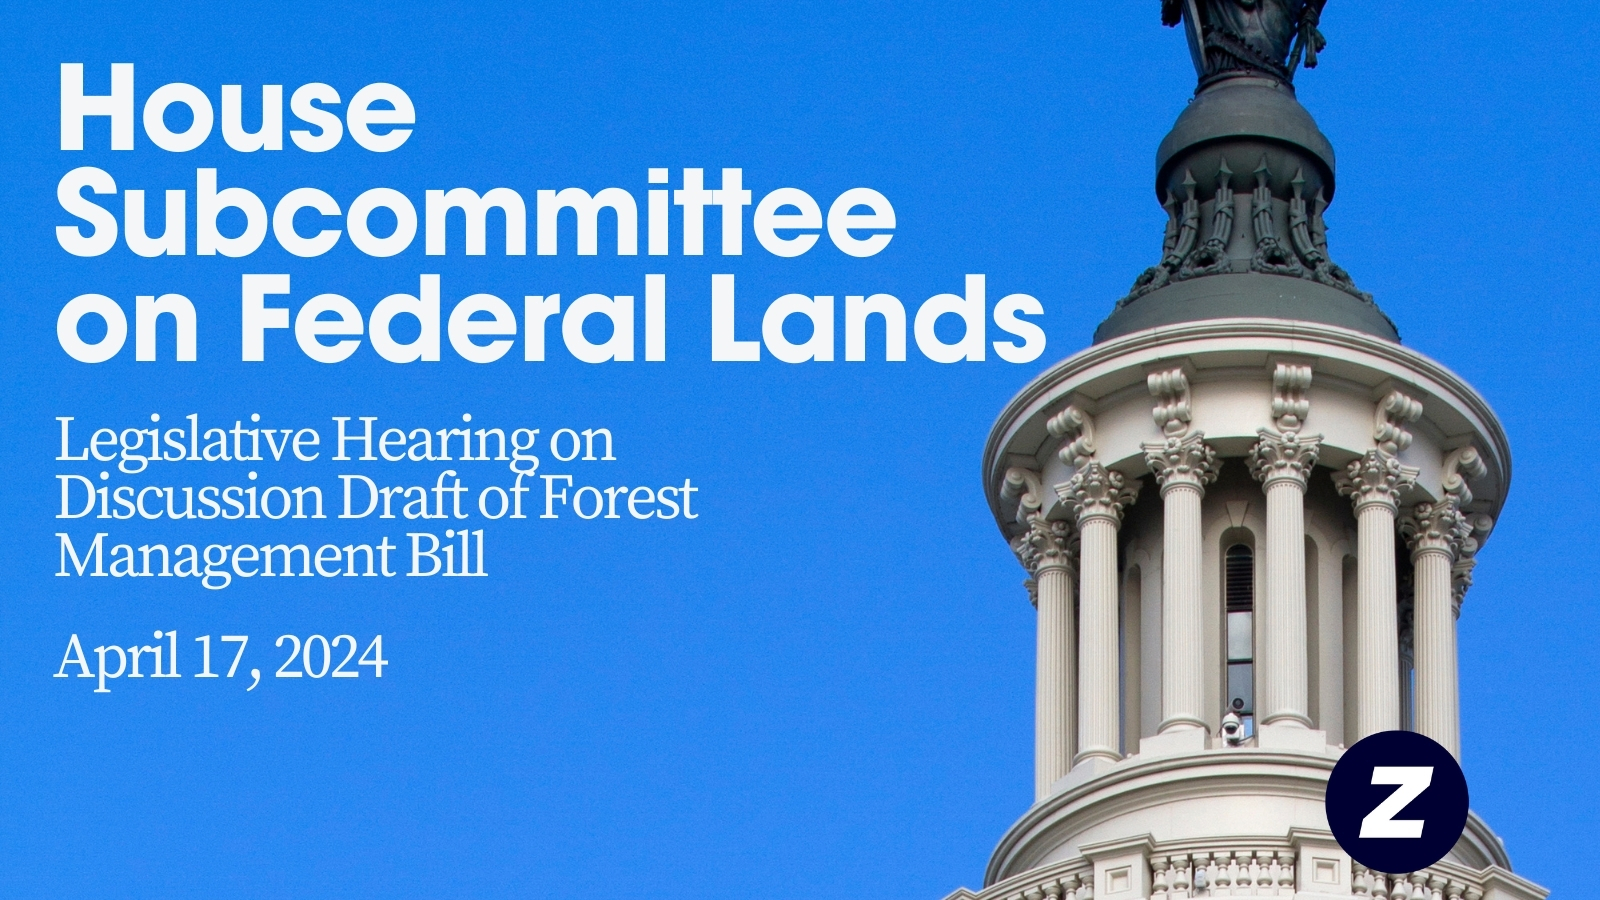 House Subcommittee on Federal Lands Legislative Hearing on Discussion Draft of Forest Management Bill